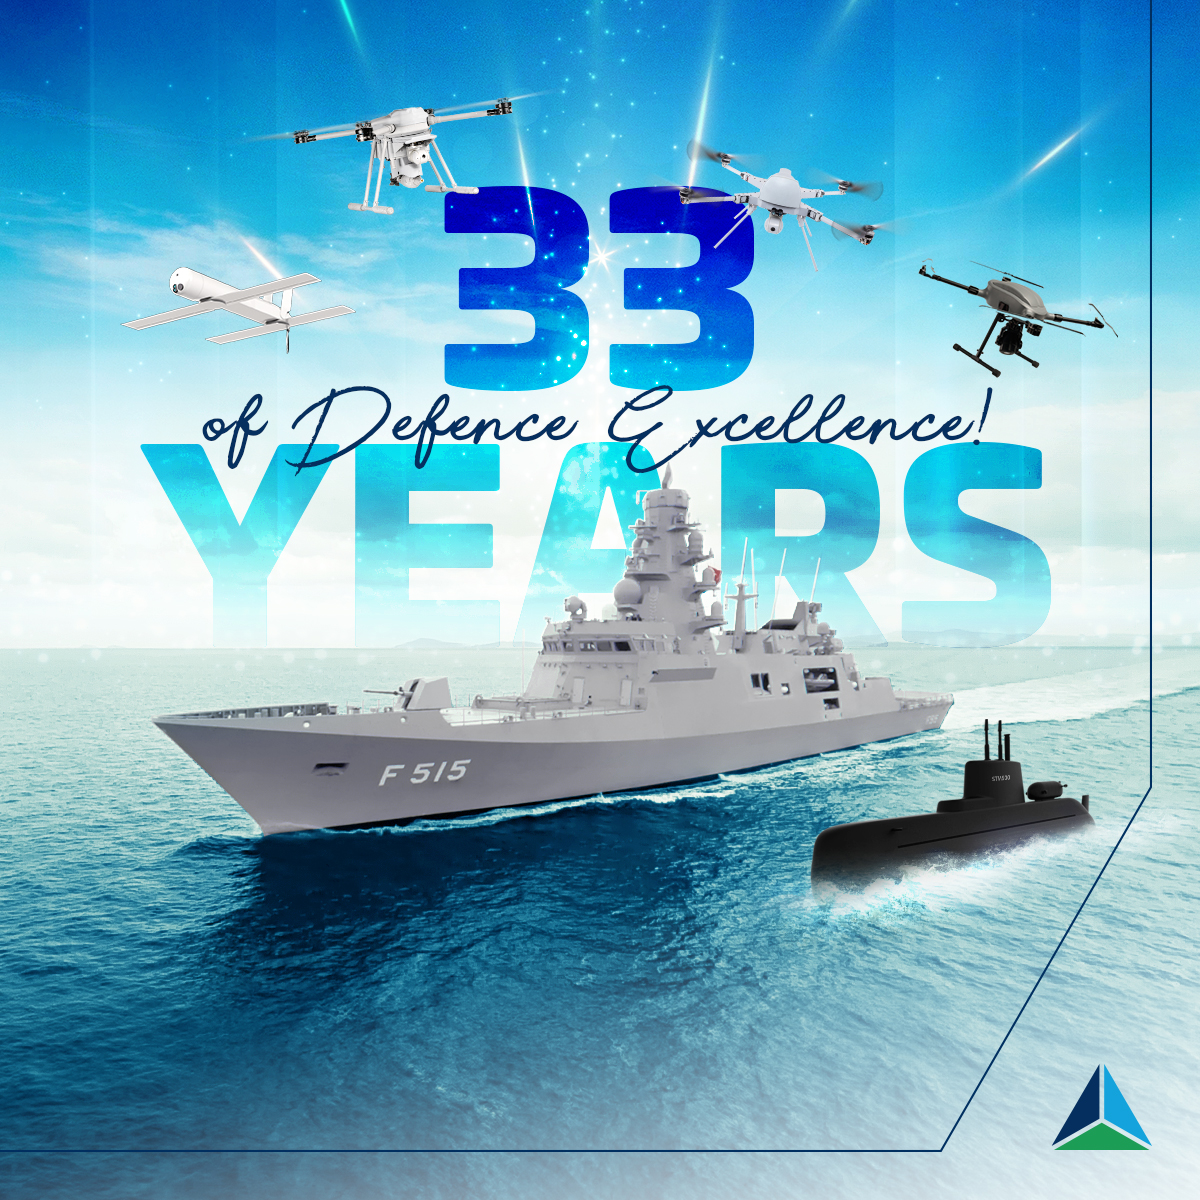 Today marks the 33rd anniversary of STM! 🎉 We're proud to celebrate our journey as a pioneer in Turkish Defence. 🇹🇷 #STMDefence #navalengineering #UAV #cybersecurity #software